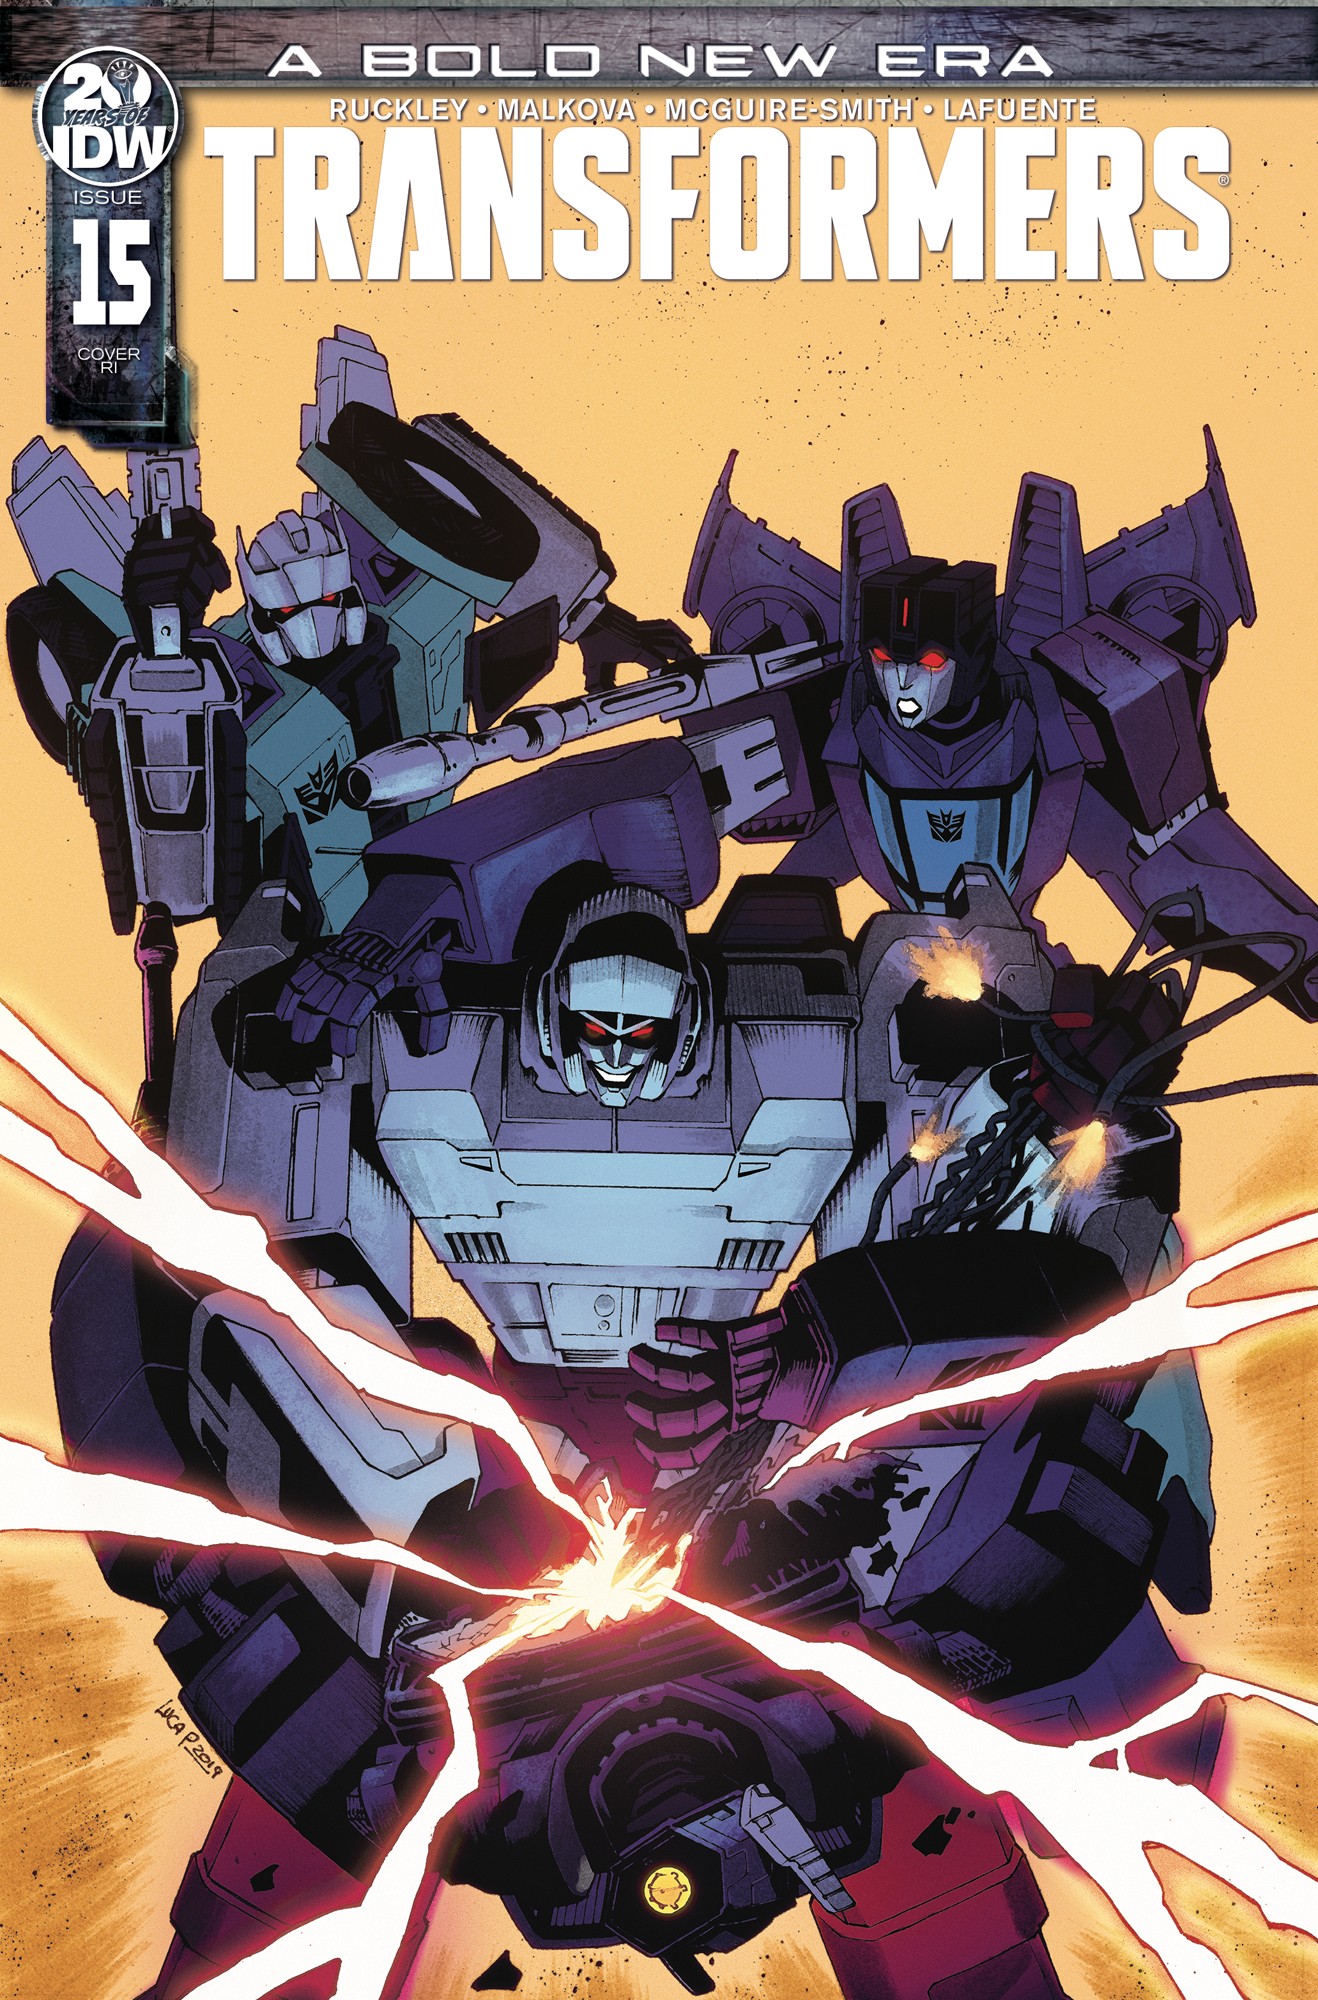 Transformers News: New Retailer Incentive Covers Revealed For IDW Transformers #15, Galaxies #3 and #4